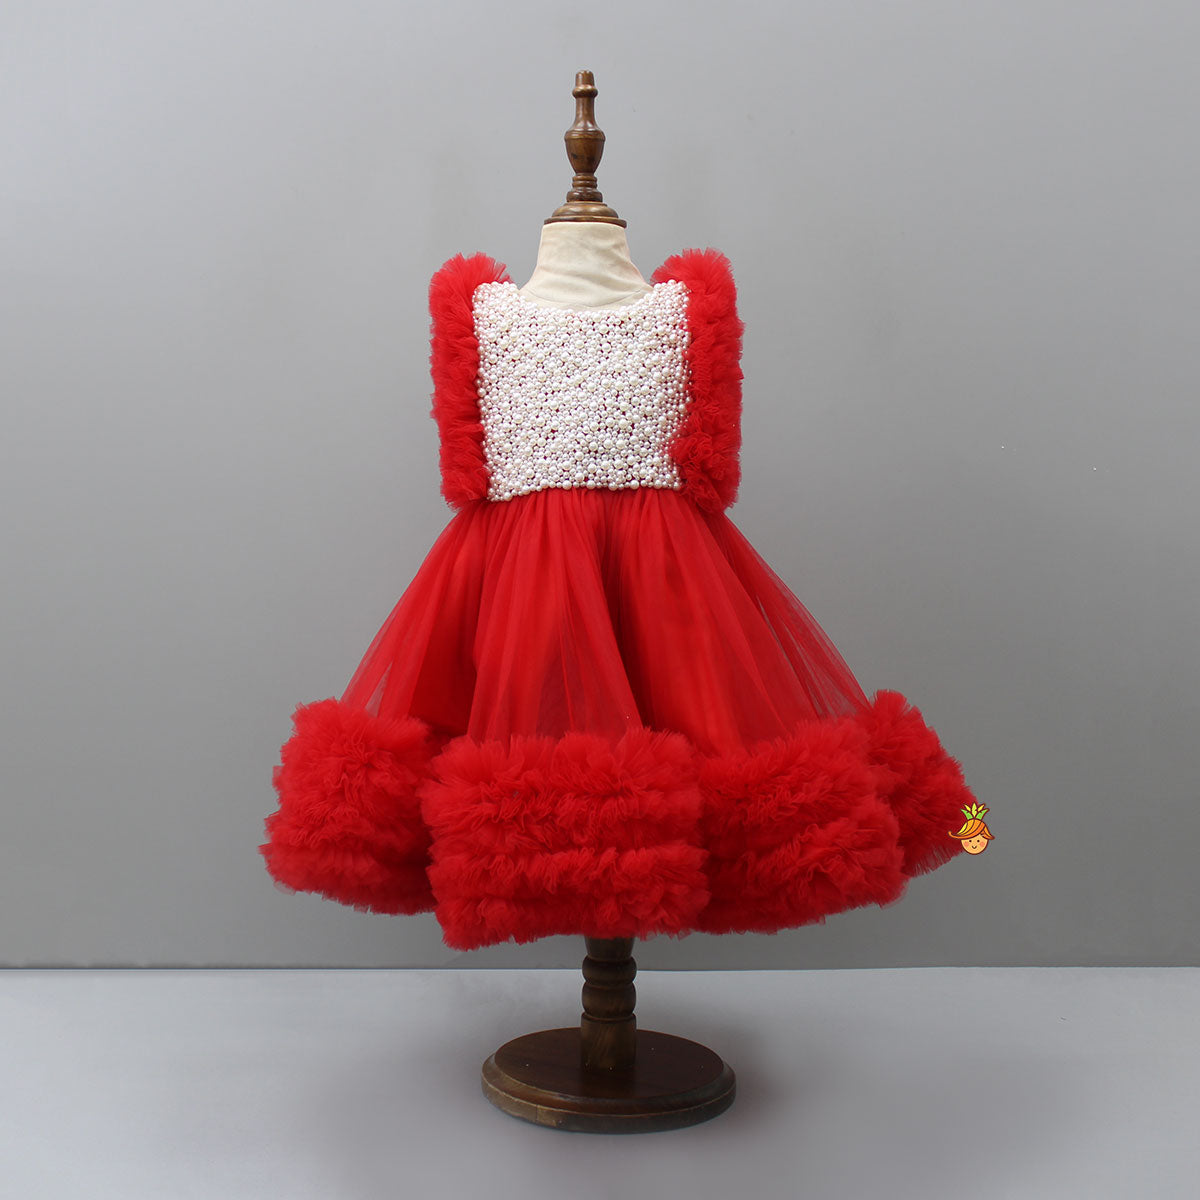 Glamorous Red Frilled Dress With Detachable Trail And Head Band